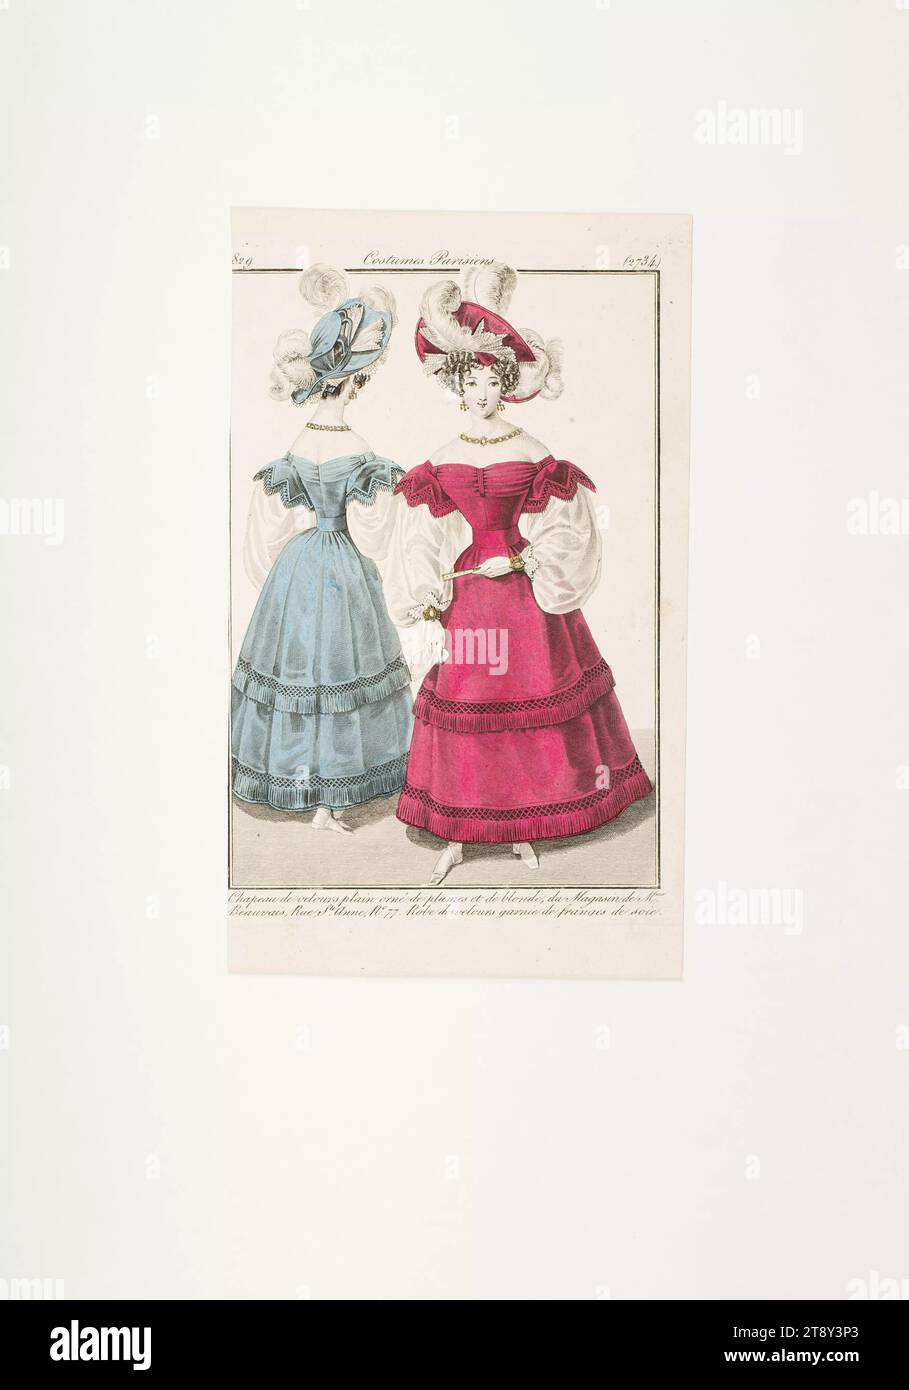 Fashion picture: Two figures, blue and red velvet dress decorated with fringes, white ham sleeves, Unknown, 1829, paper, colored, copperplate engraving, height 19, 8 cm, width 11, 9 cm, plate size 17, 6×11, 4 cm, Fashion, Bourgeoisie, Biedermeier, fashion plates, head-gear, woman, dress, gown, The Vienna Collection Stock Photo